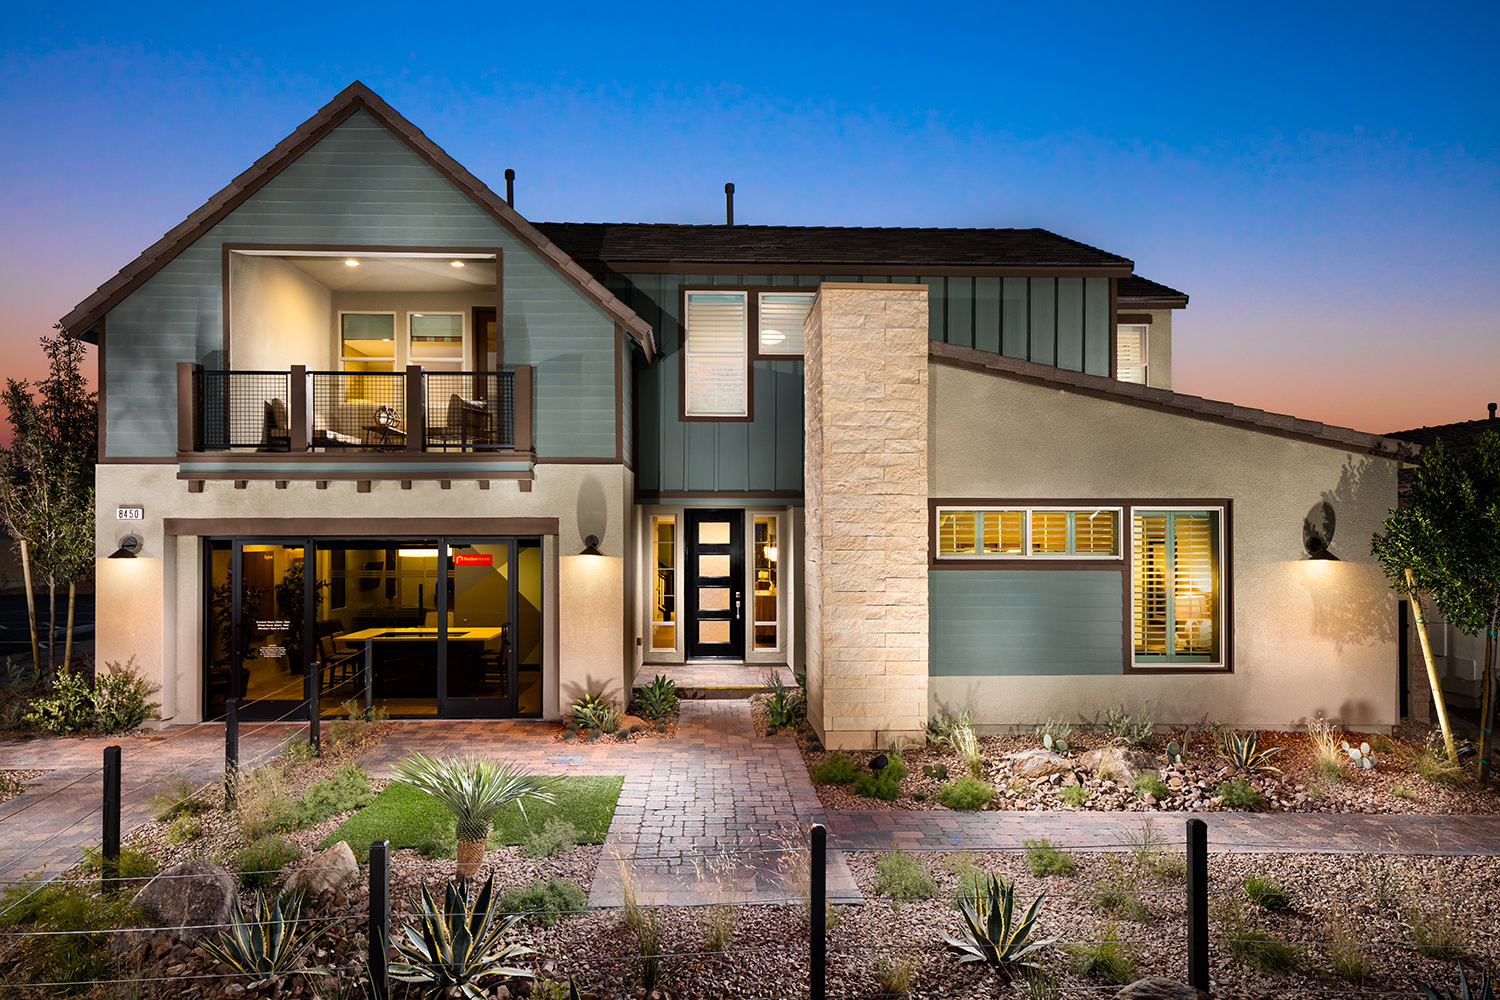 Keystone by Pardee - The New Home Experts® - Las Vegas